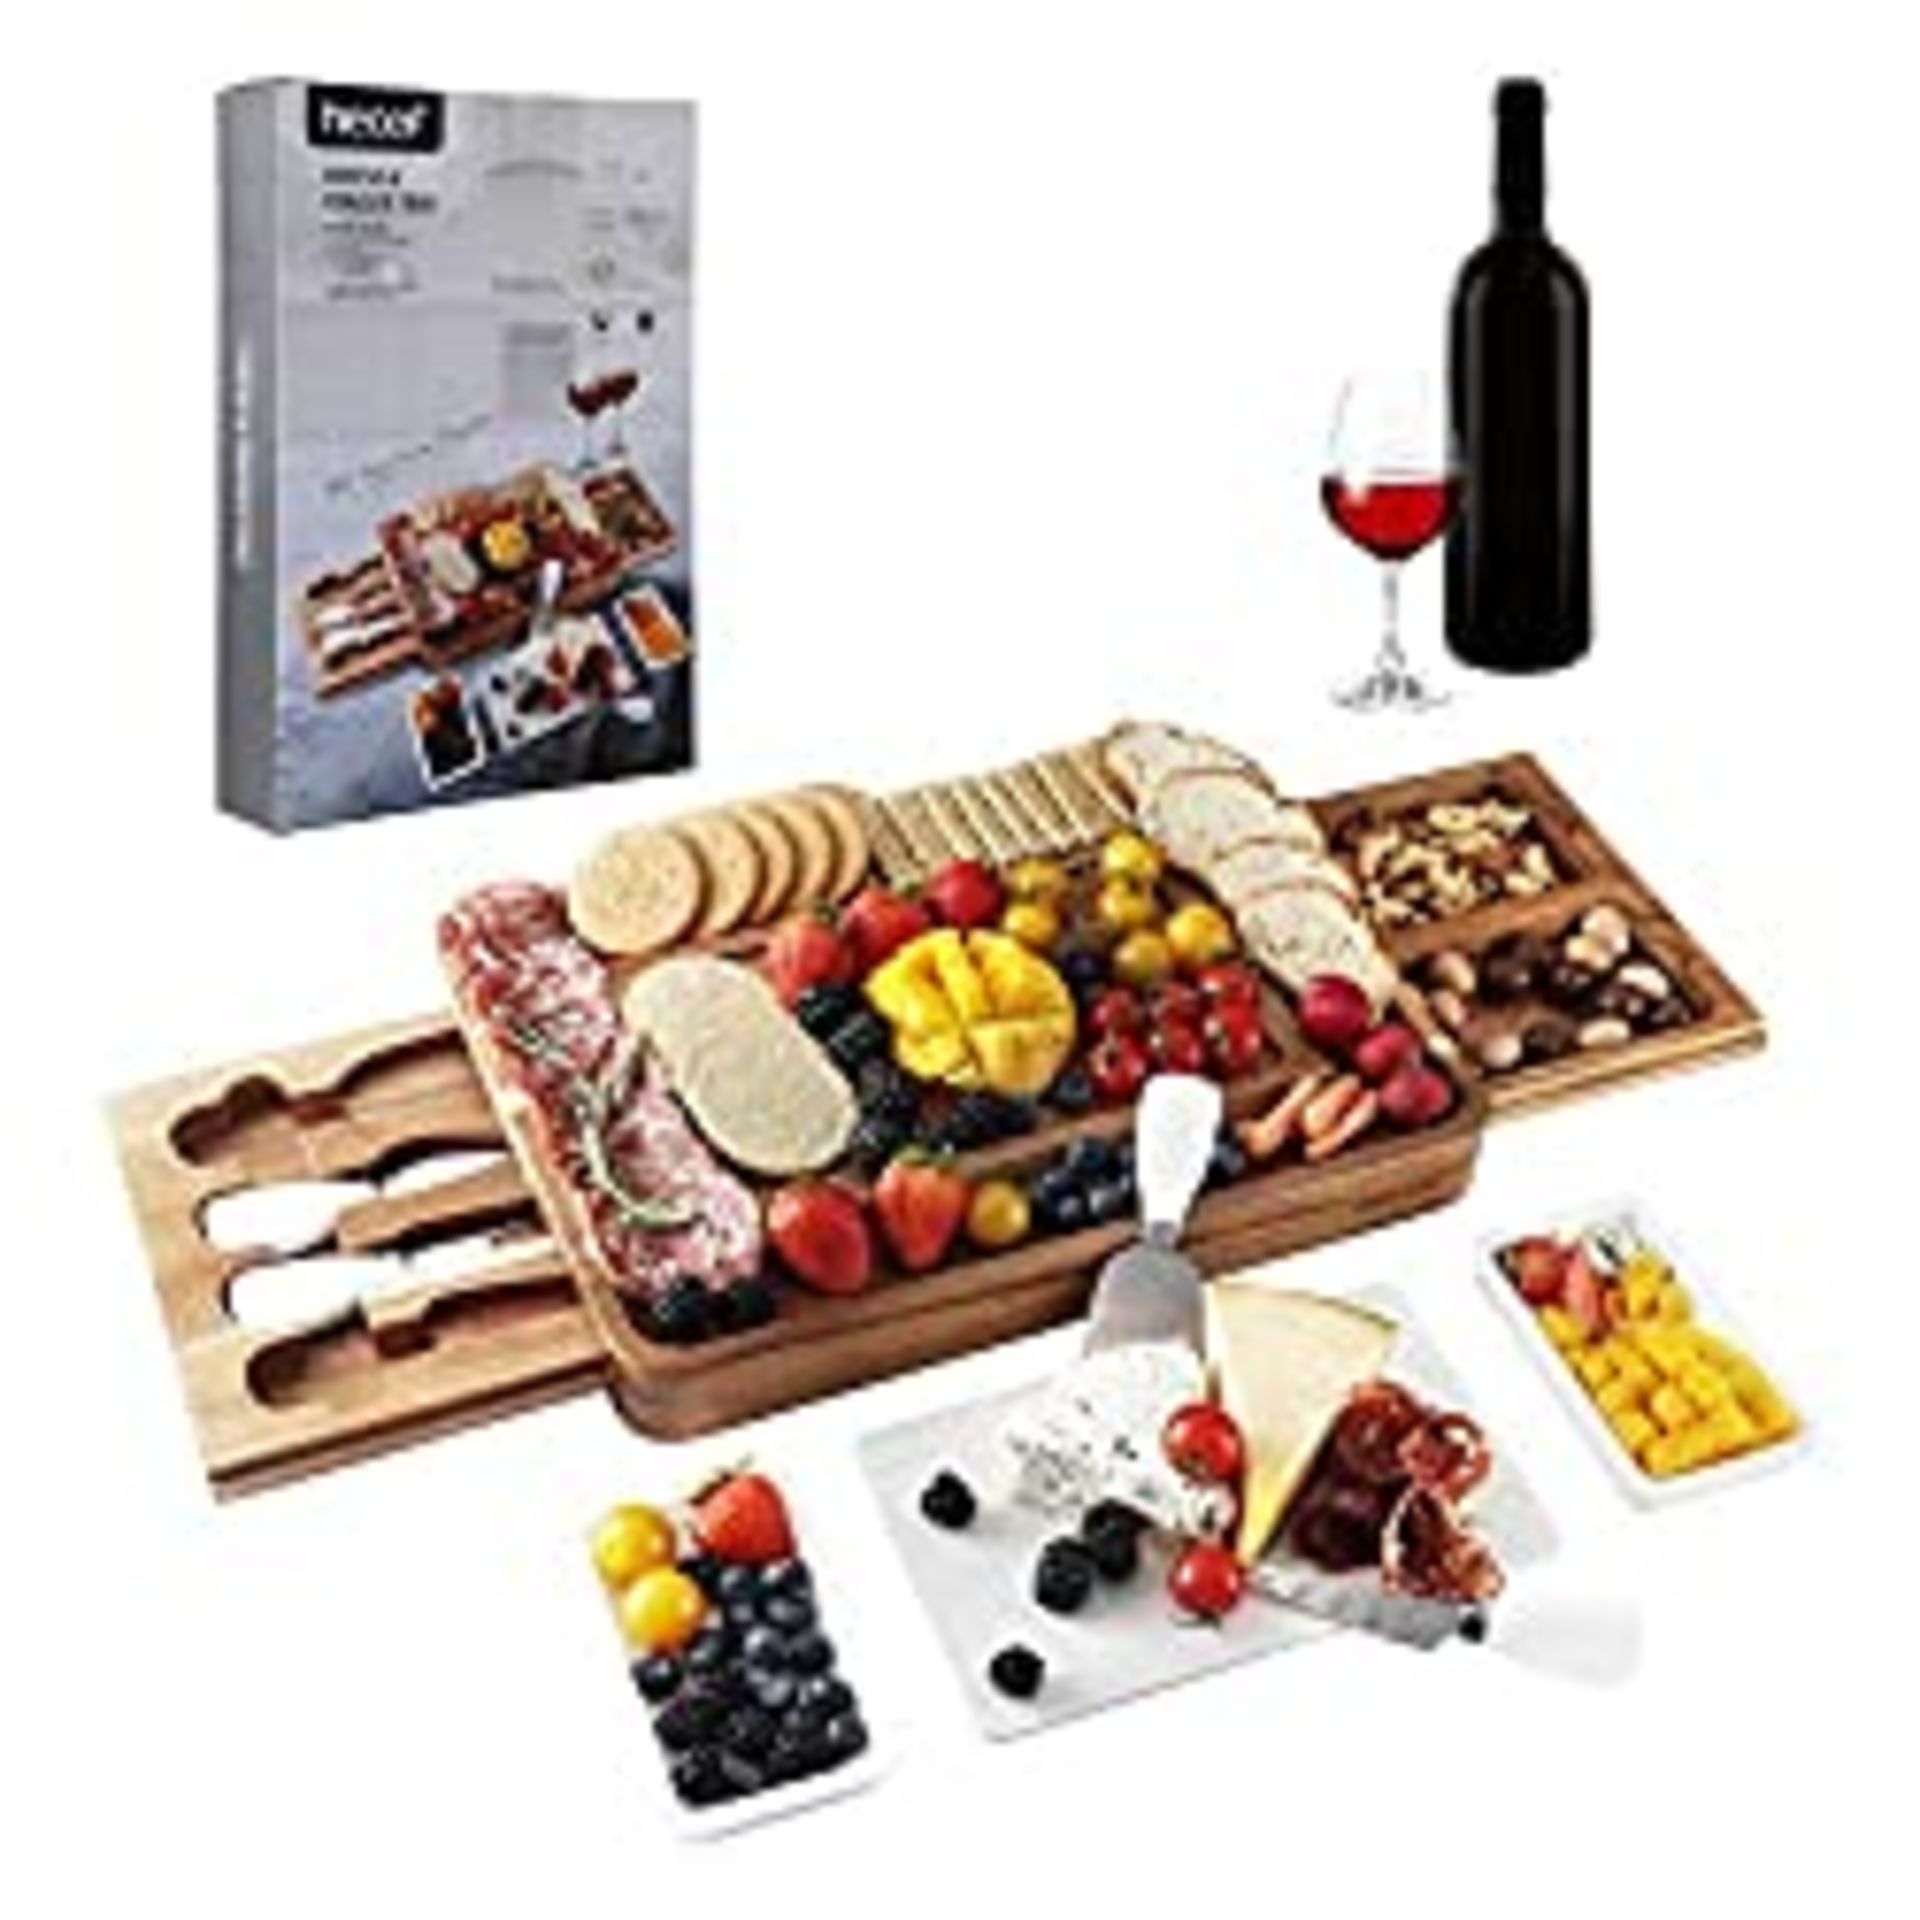 RRP £86.44 Total, Lot Consisting of 2 Items - See Description. - Image 3 of 3